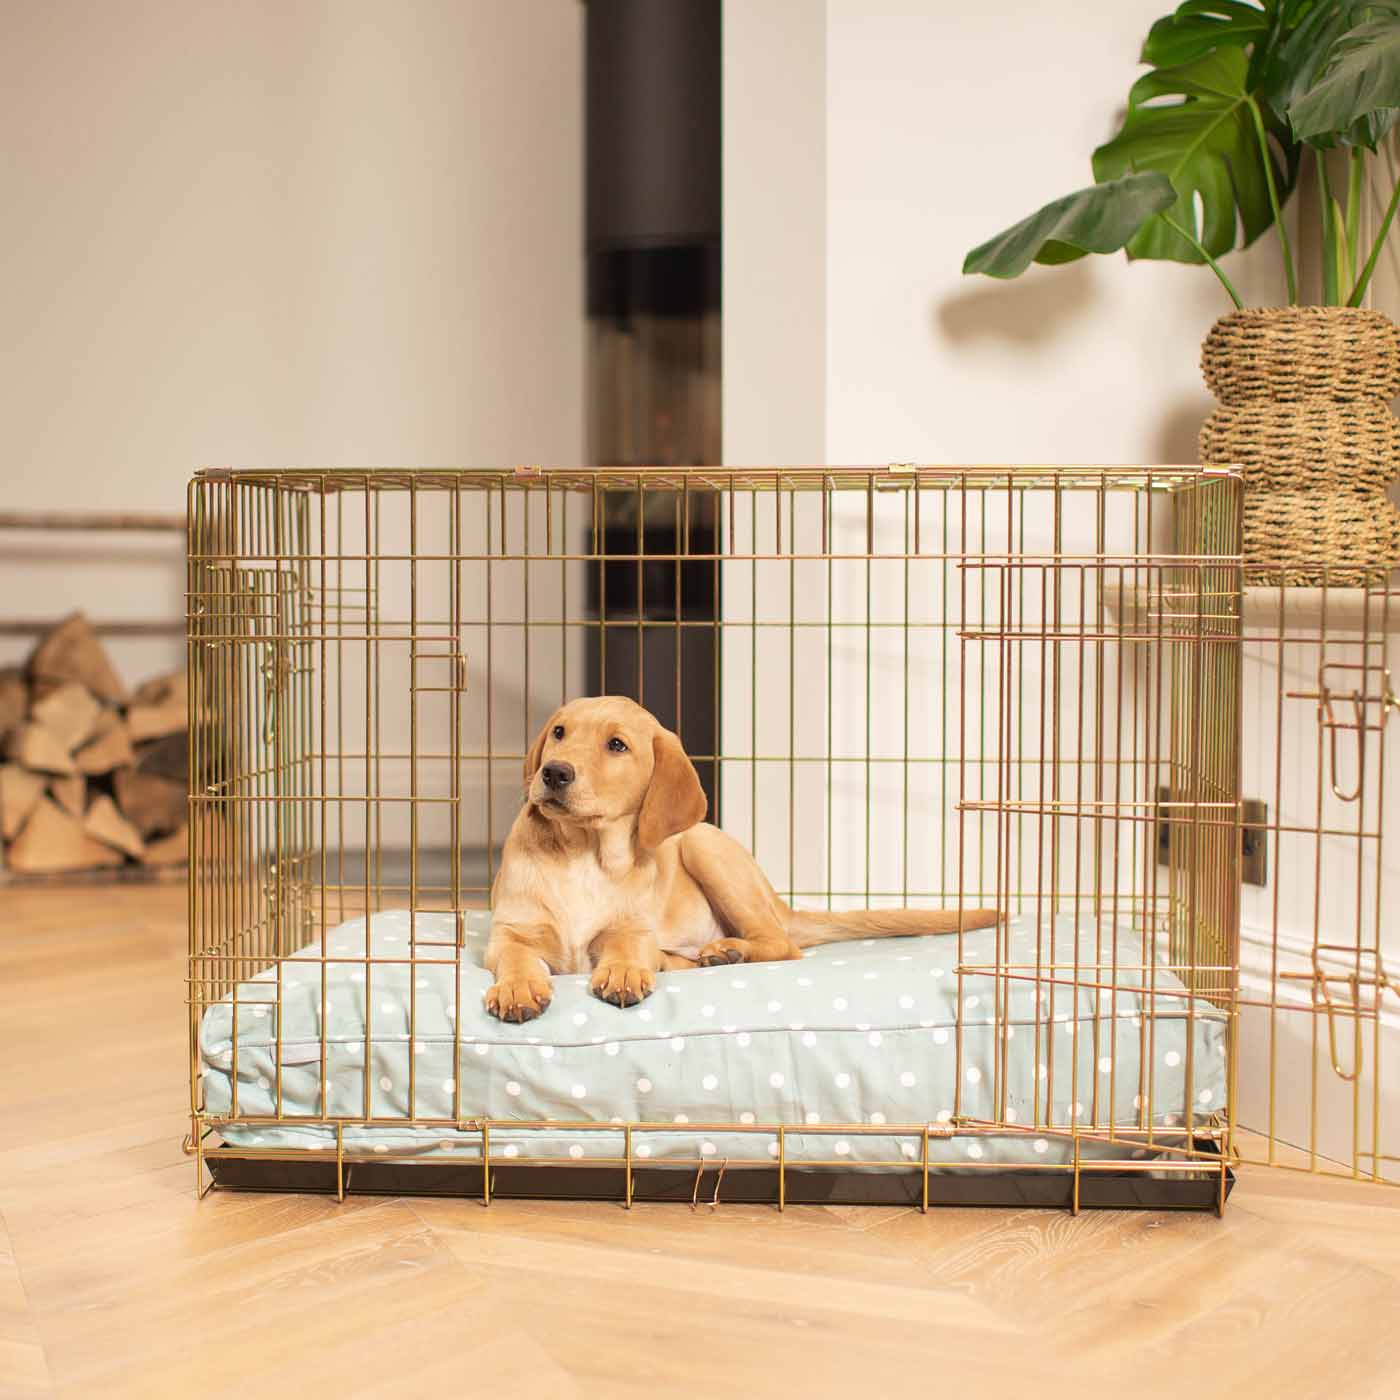 Luxury Gold Dog Cage Set With Cushion, in Duck Egg Spot. The Perfect Dog Cage For The Ultimate Naptime, Available Now at Lords & Labradors US